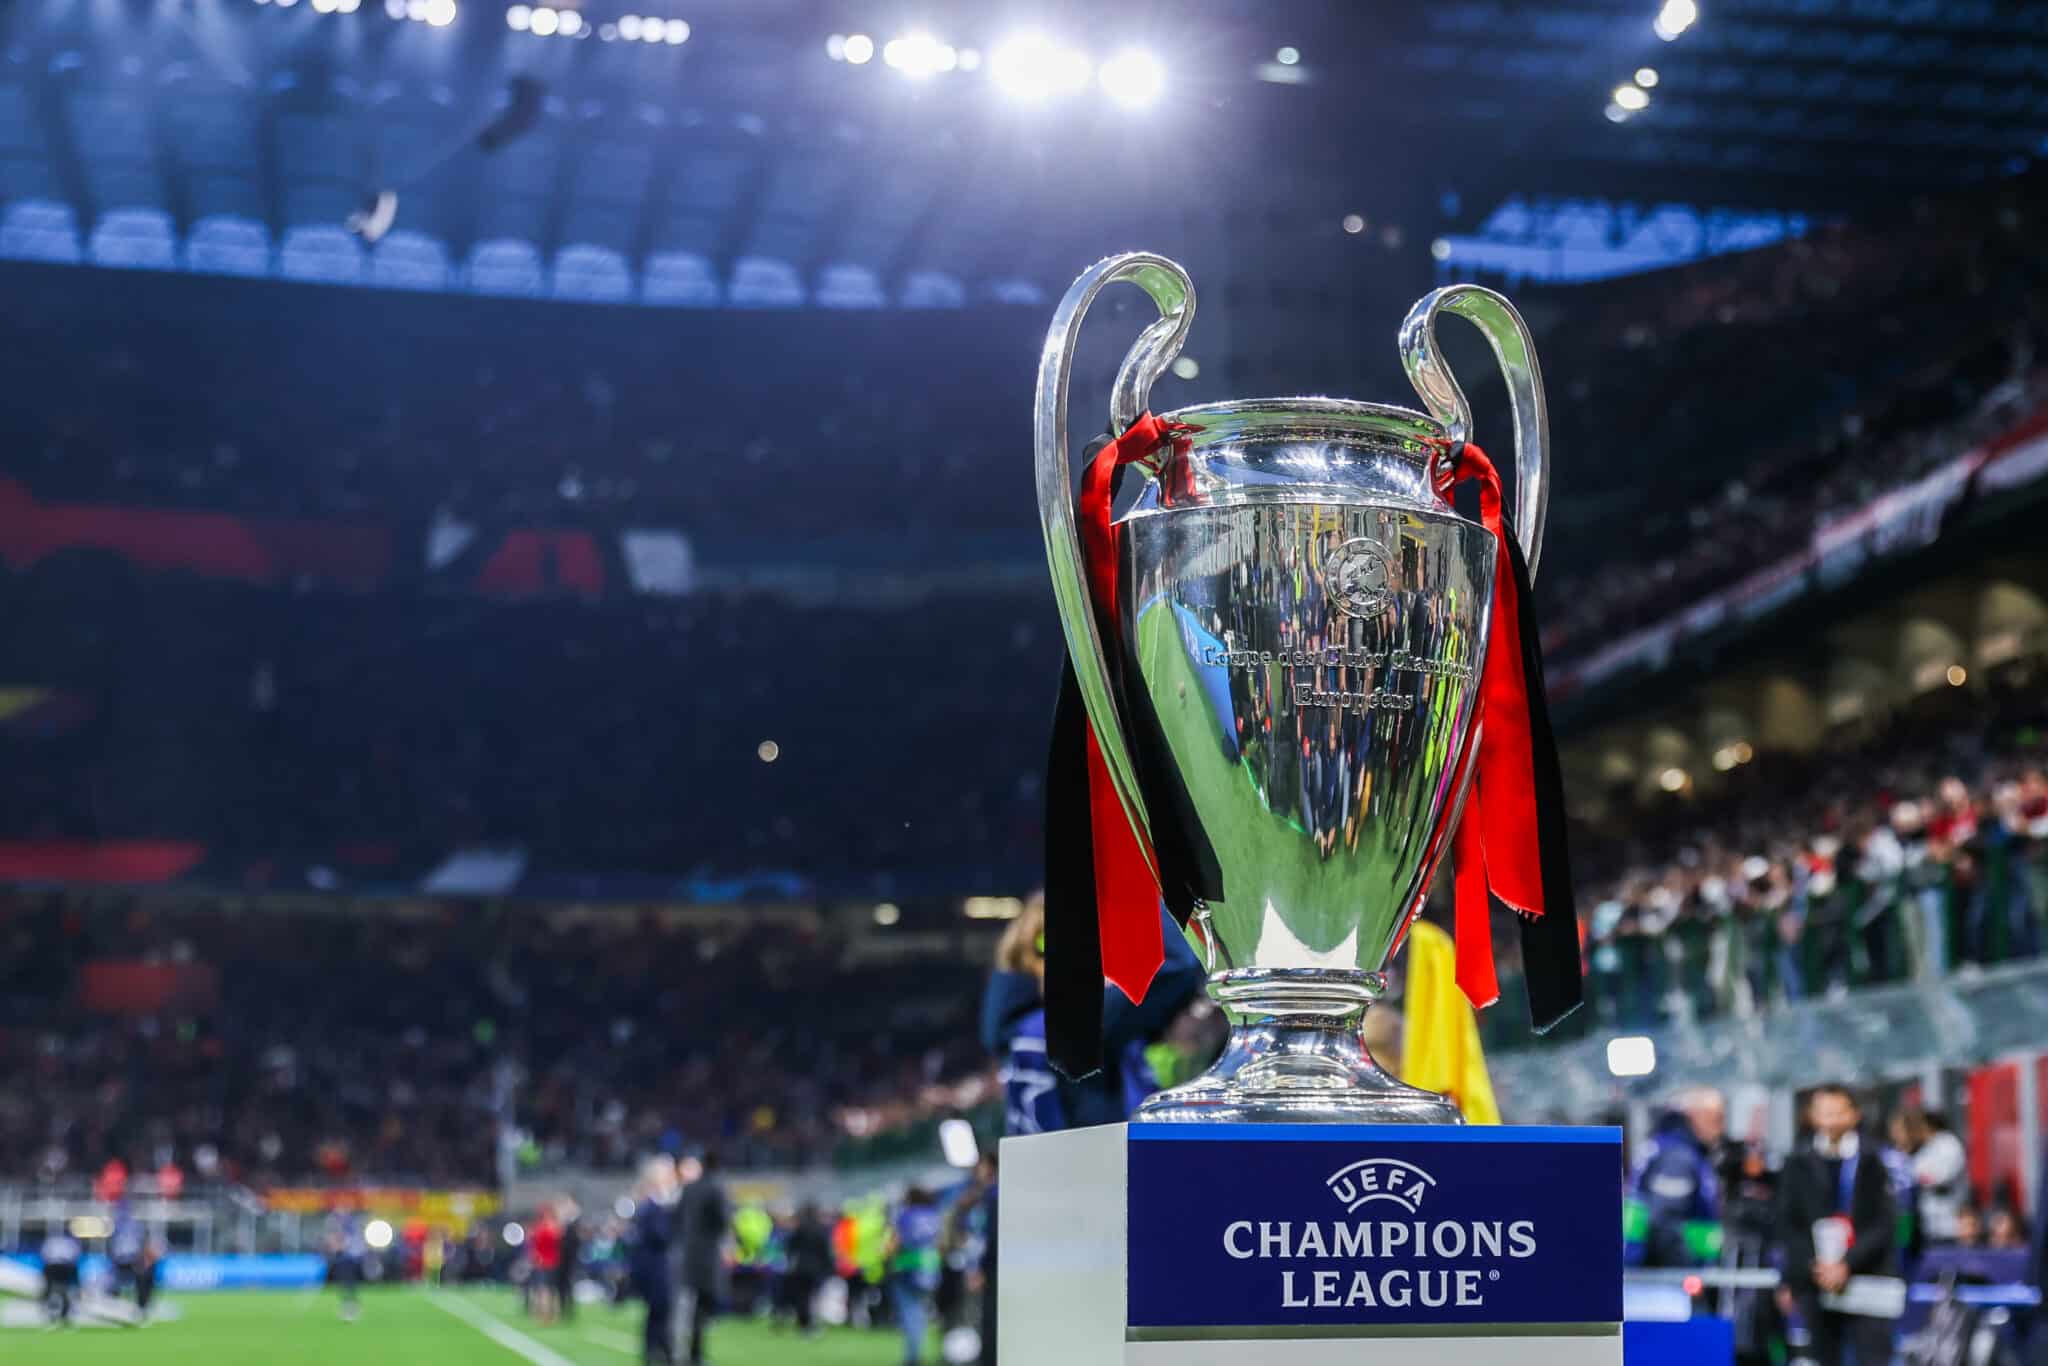 The glorious trophy ahead of the Champions League Final!